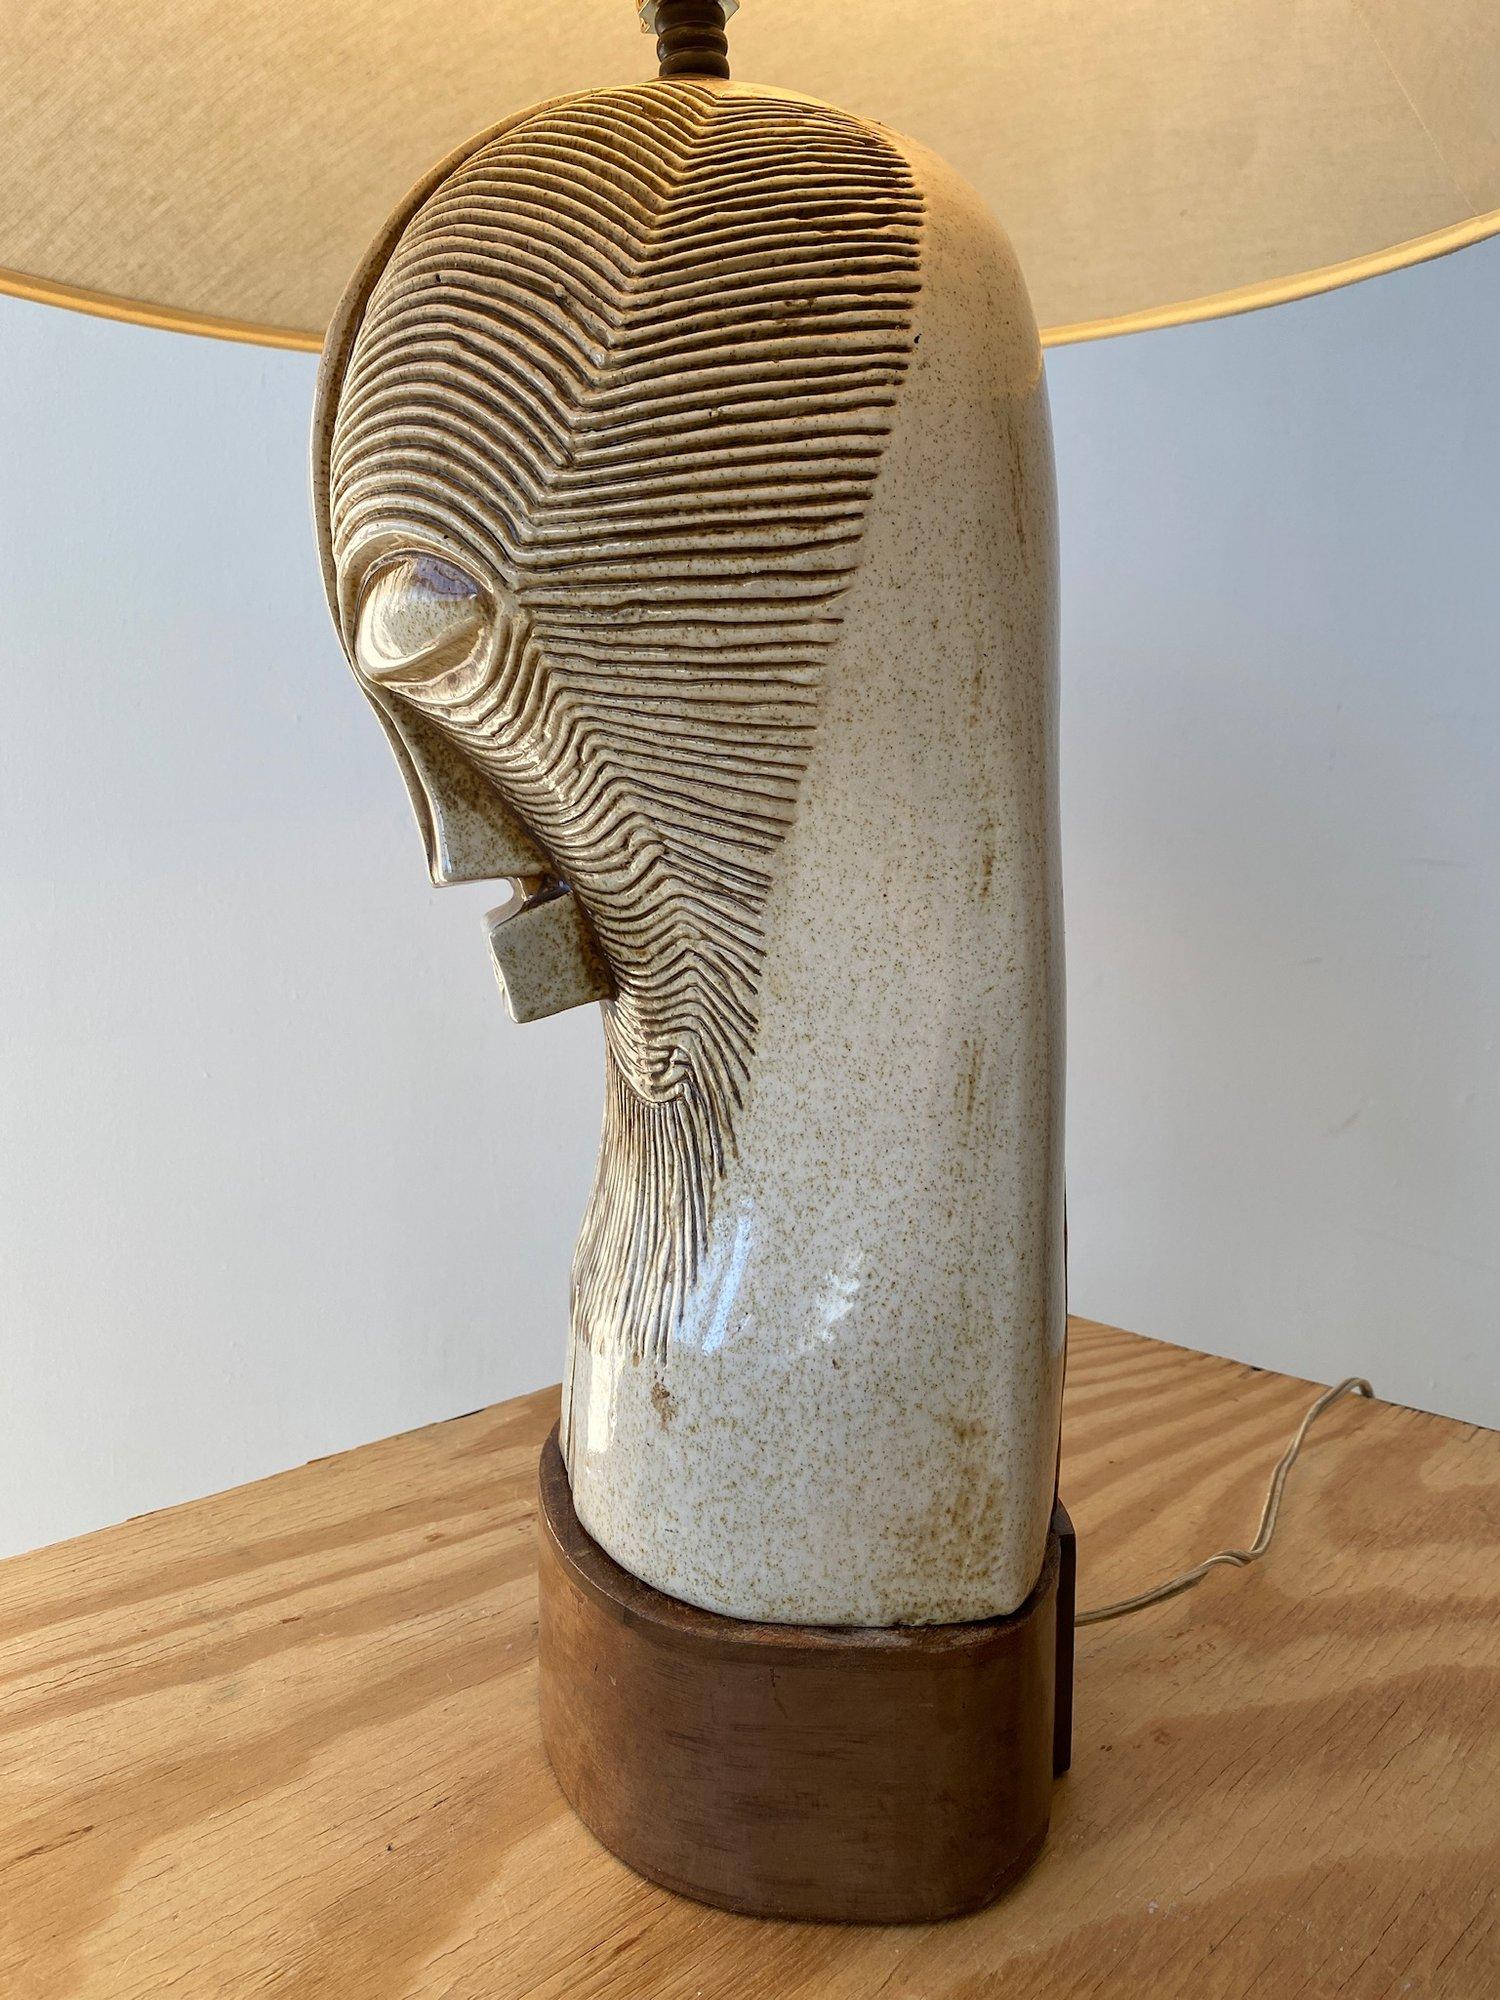 Vintage Large Scale Ceramic Kifwebe-Inspired Mask Lamp on Mahogany Base, 1950s For Sale 1